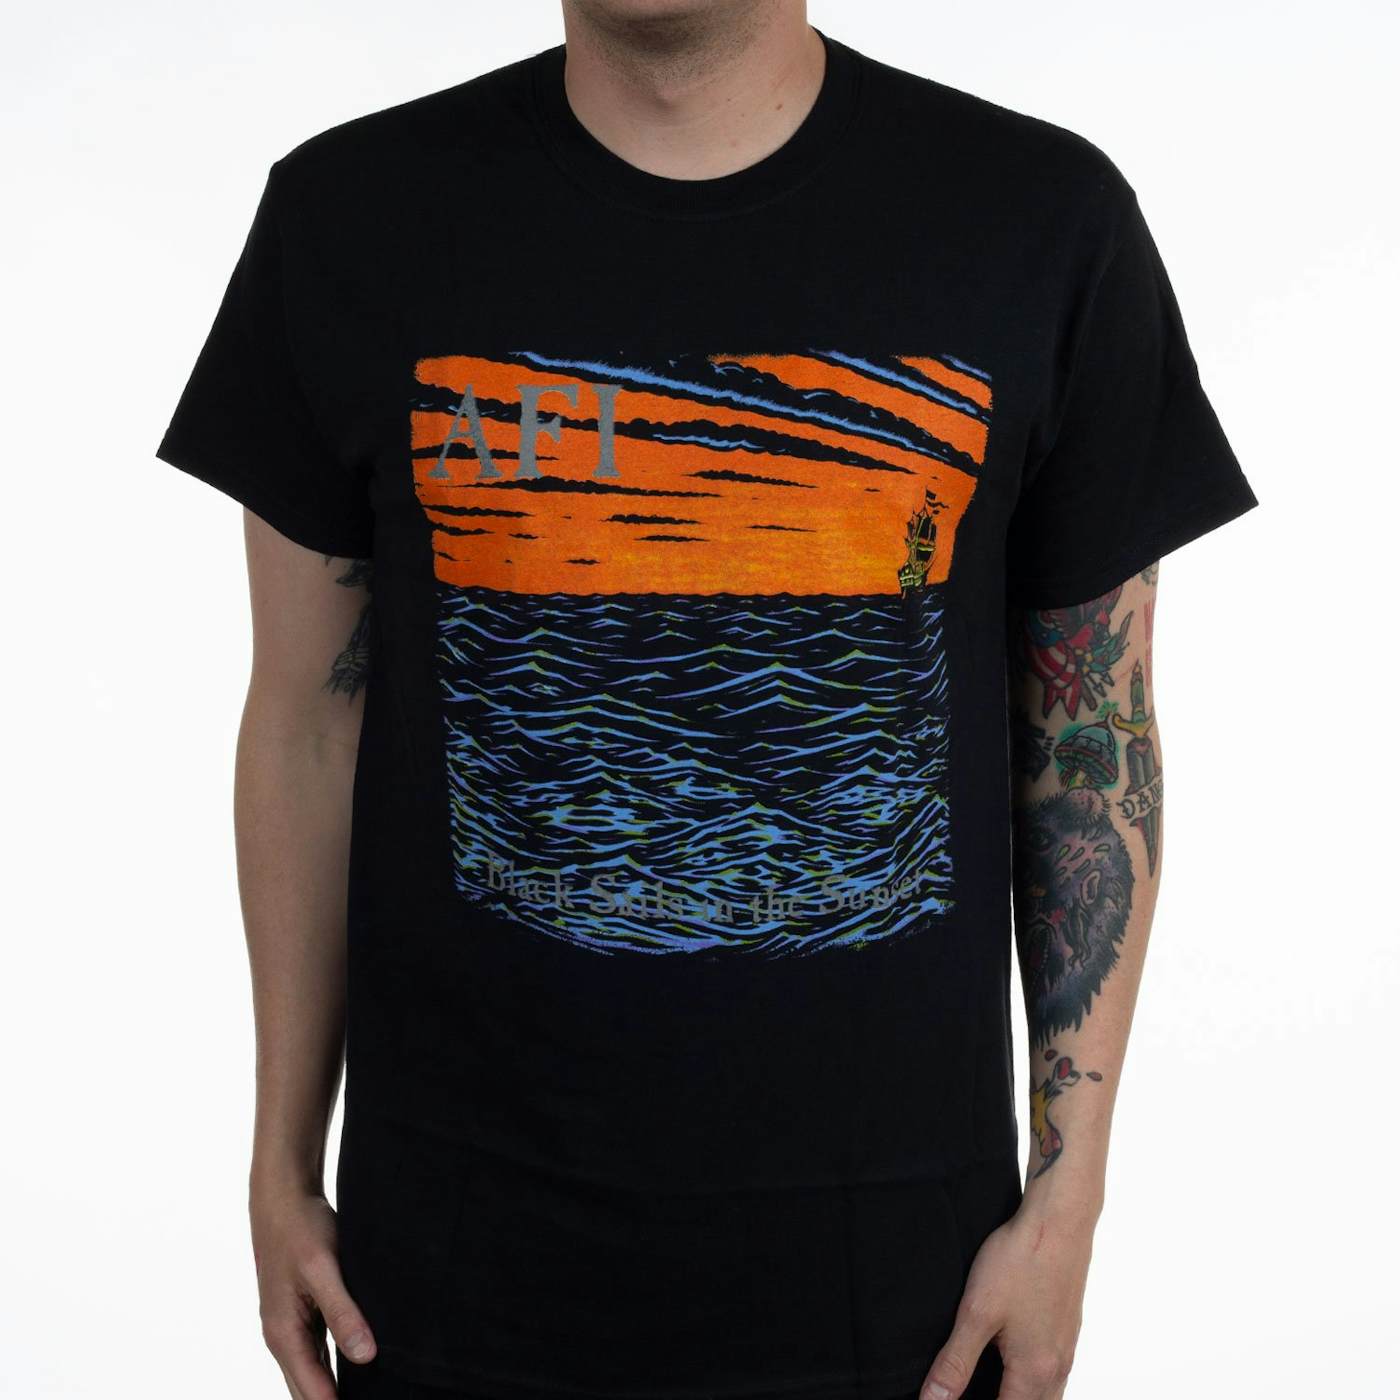 AFI "Black Sails In The Sunset" T-Shirt